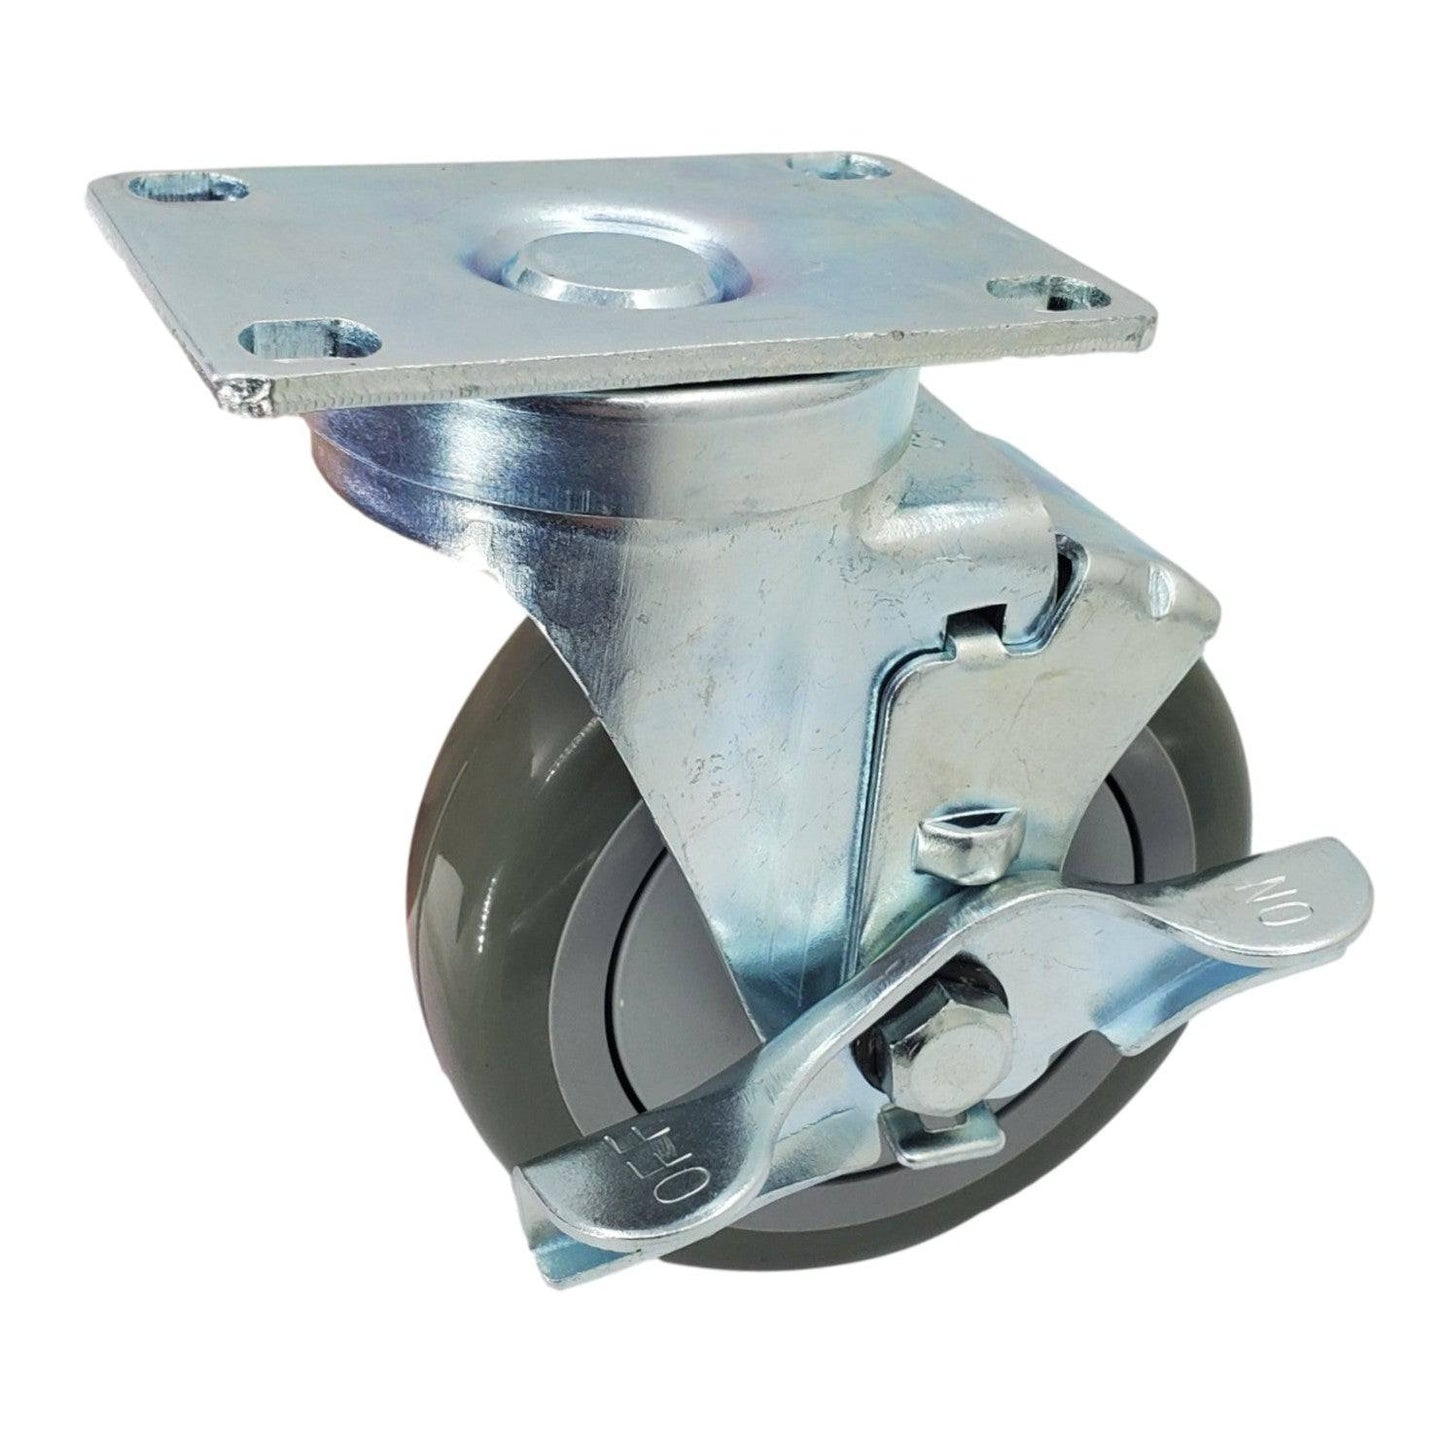 4" x 1-1/4" Poly-Pro Wheel Swivel Caster w/ Top Lock Brake- 350 lbs. capacity - Durable Superior Casters